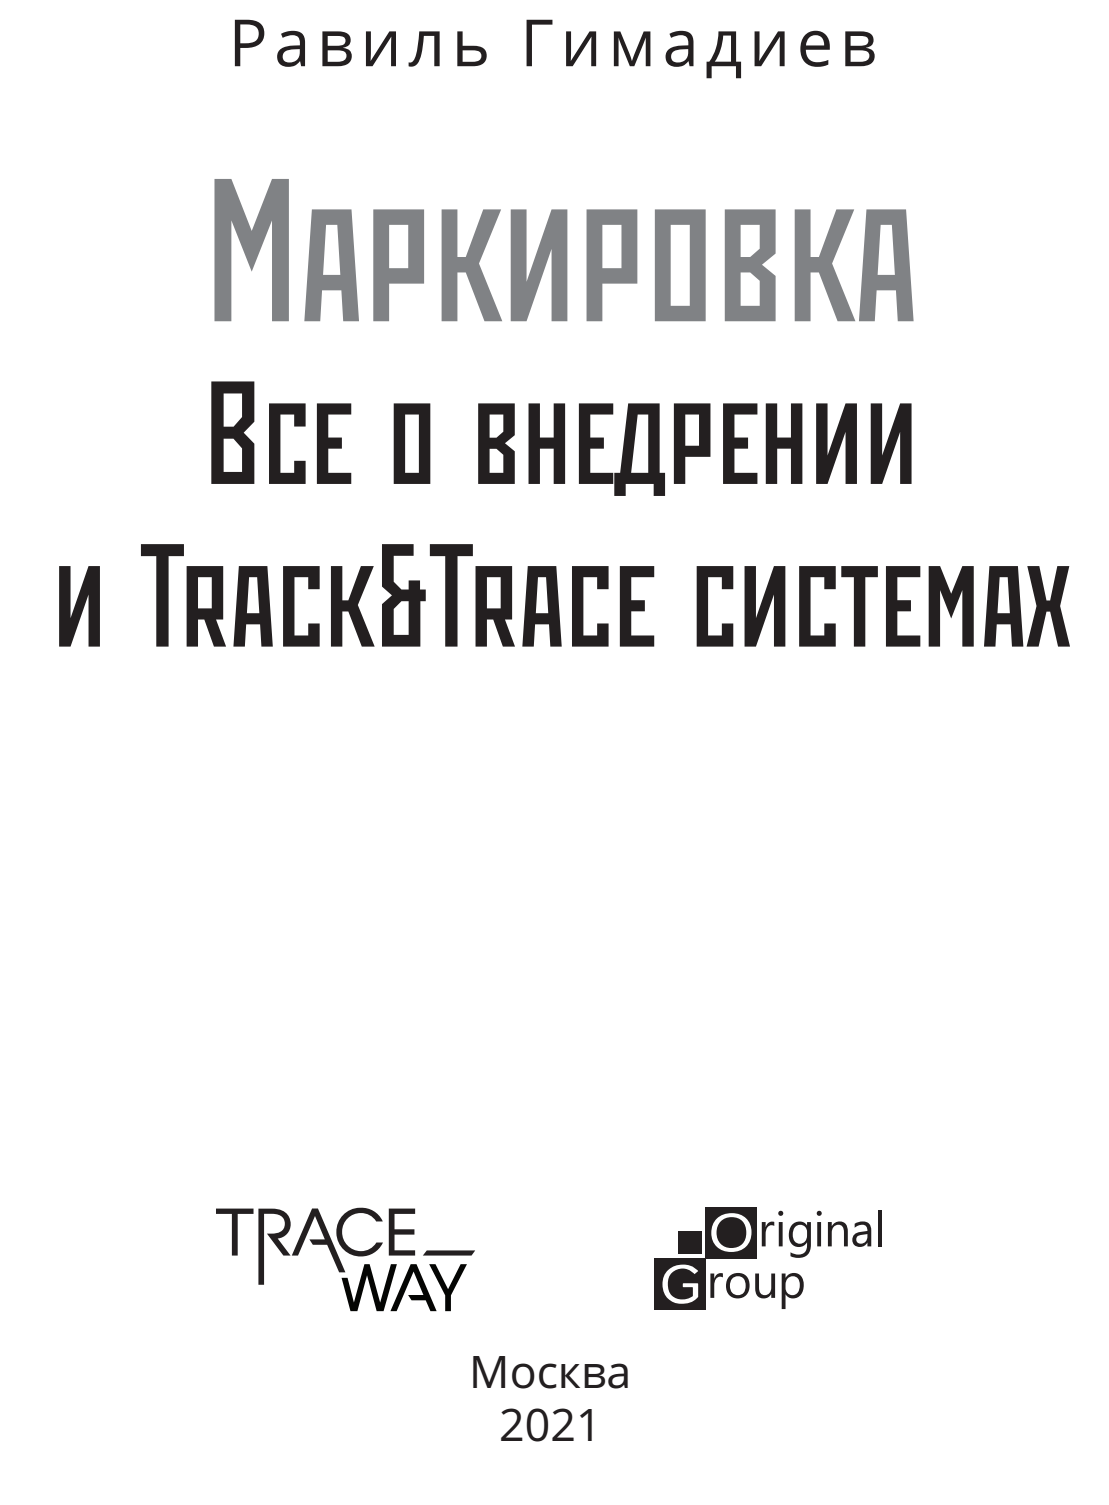 track & trace